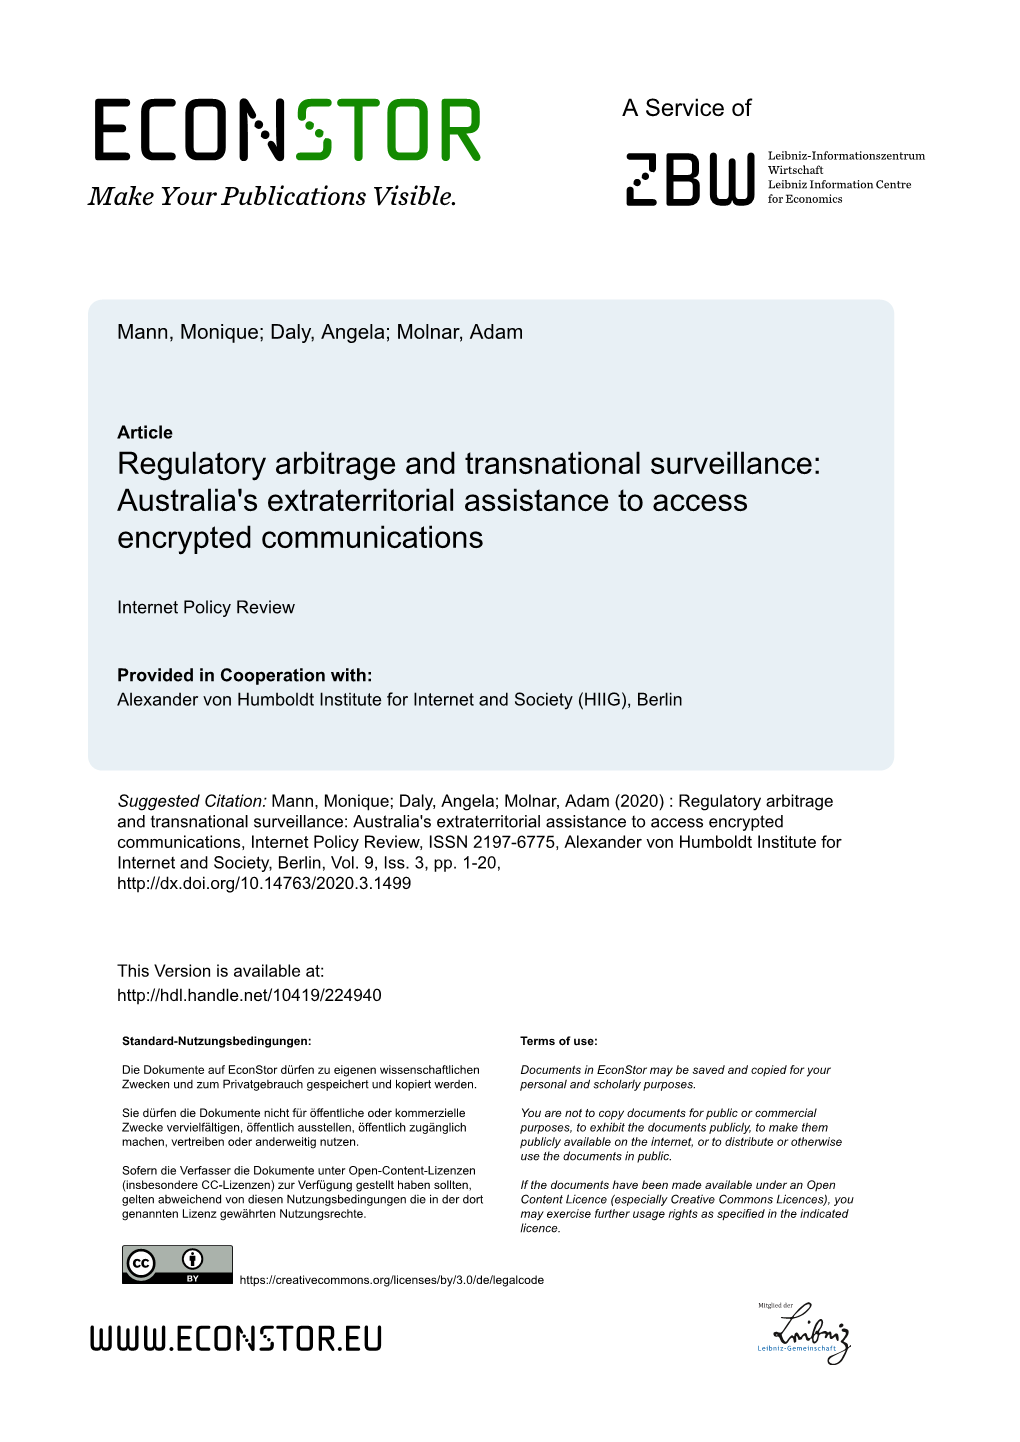 Regulatory Arbitrage and Transnational Surveillance: Australia's Extraterritorial Assistance to Access Encrypted Communications